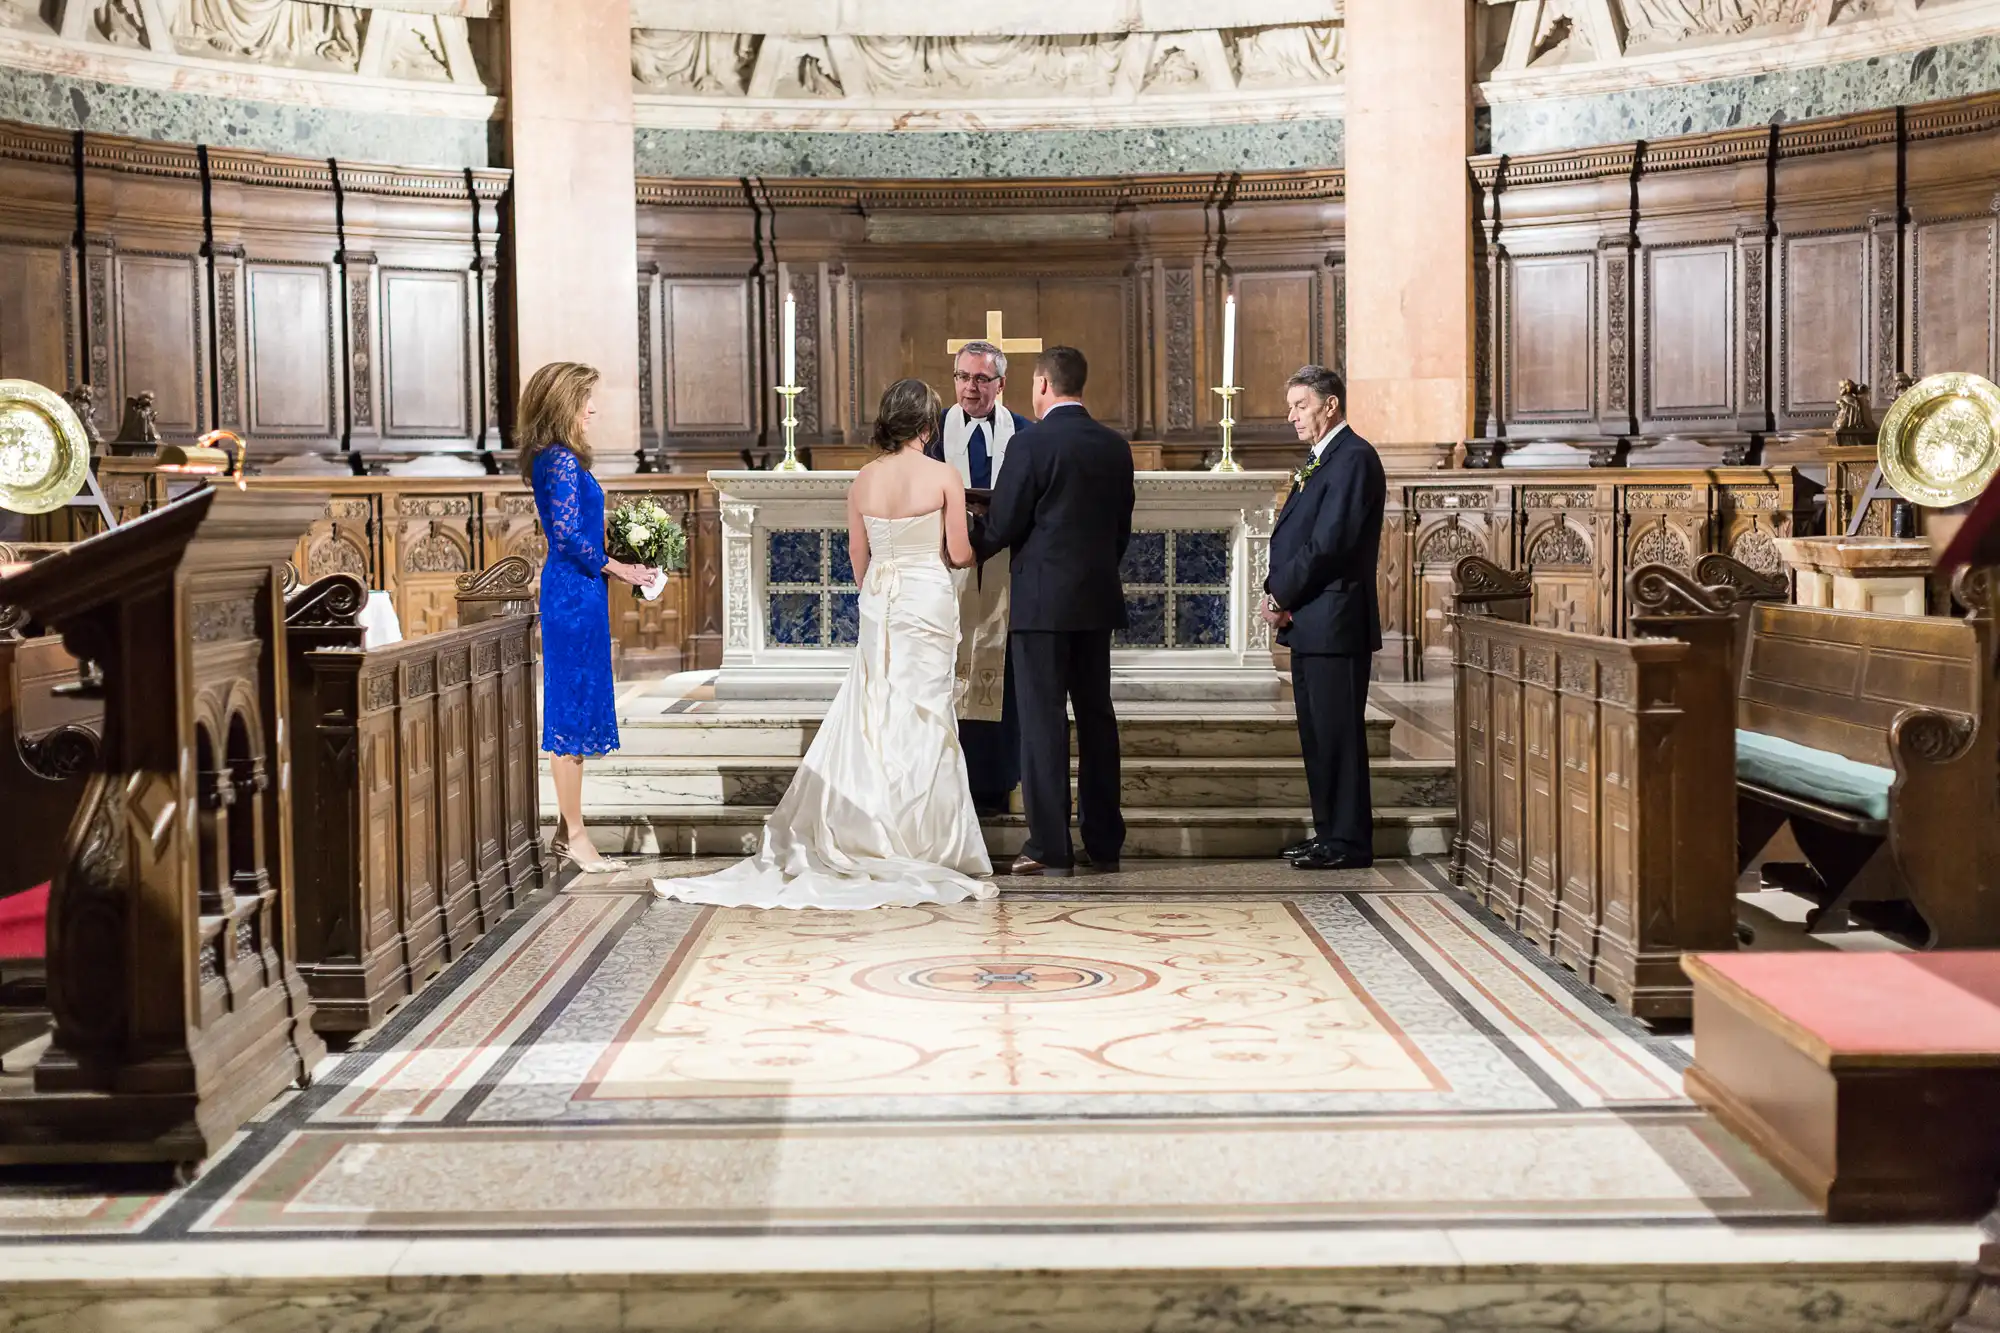 A wedding ceremony inside a grand church, featuring a bride in a white gown and a groom in a suit, standing before an officiant, with two witnesses nearby.